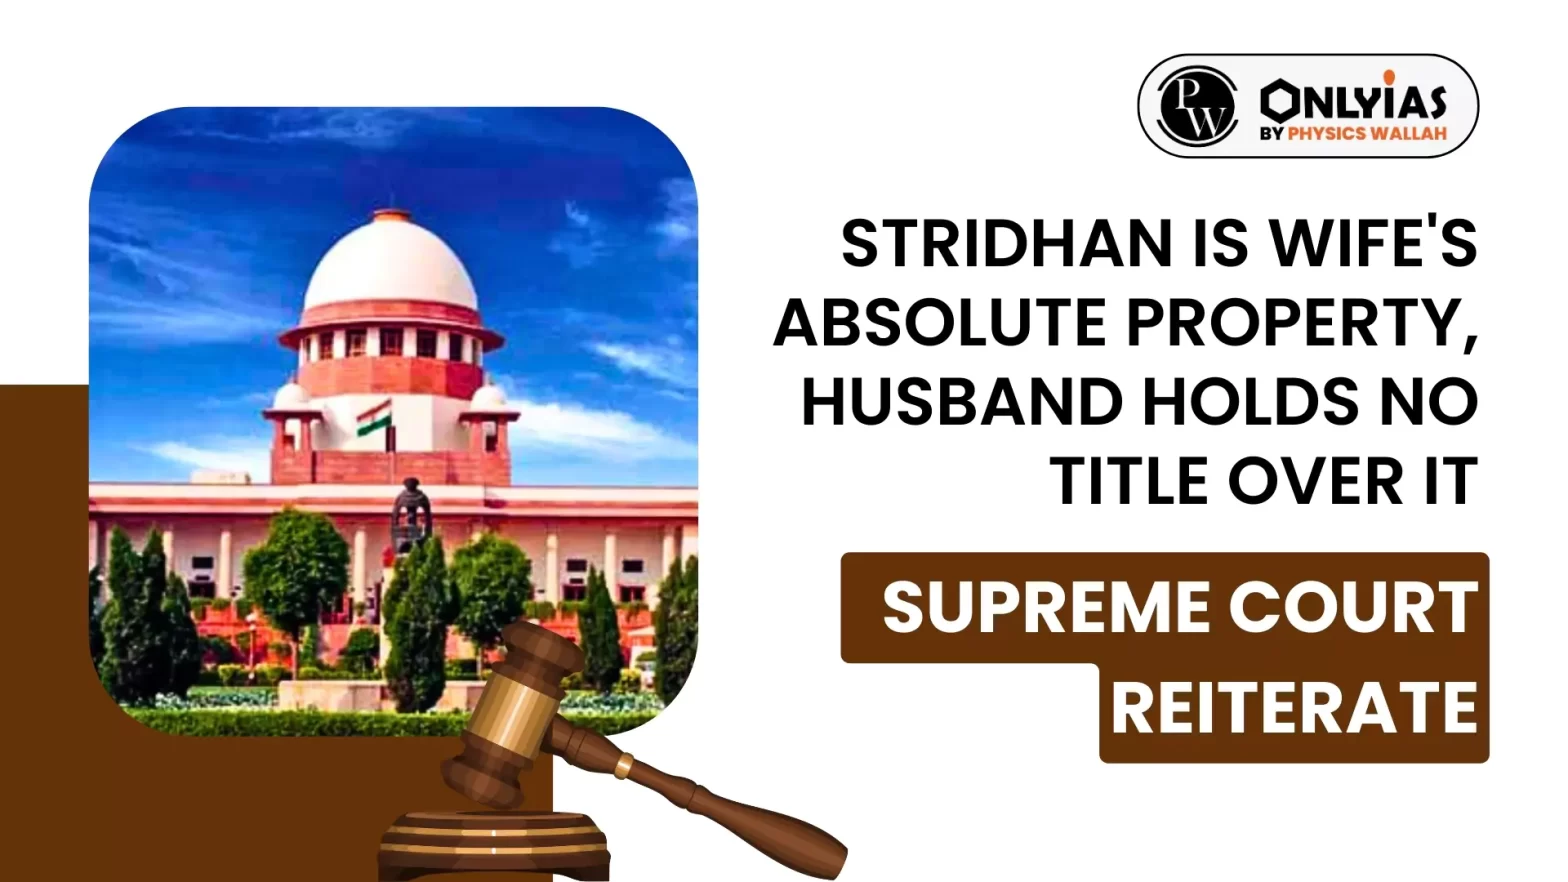 Stridhan Is Wife’s Absolute Property, Husband Holds No Title Over It: Supreme Court Reiterates